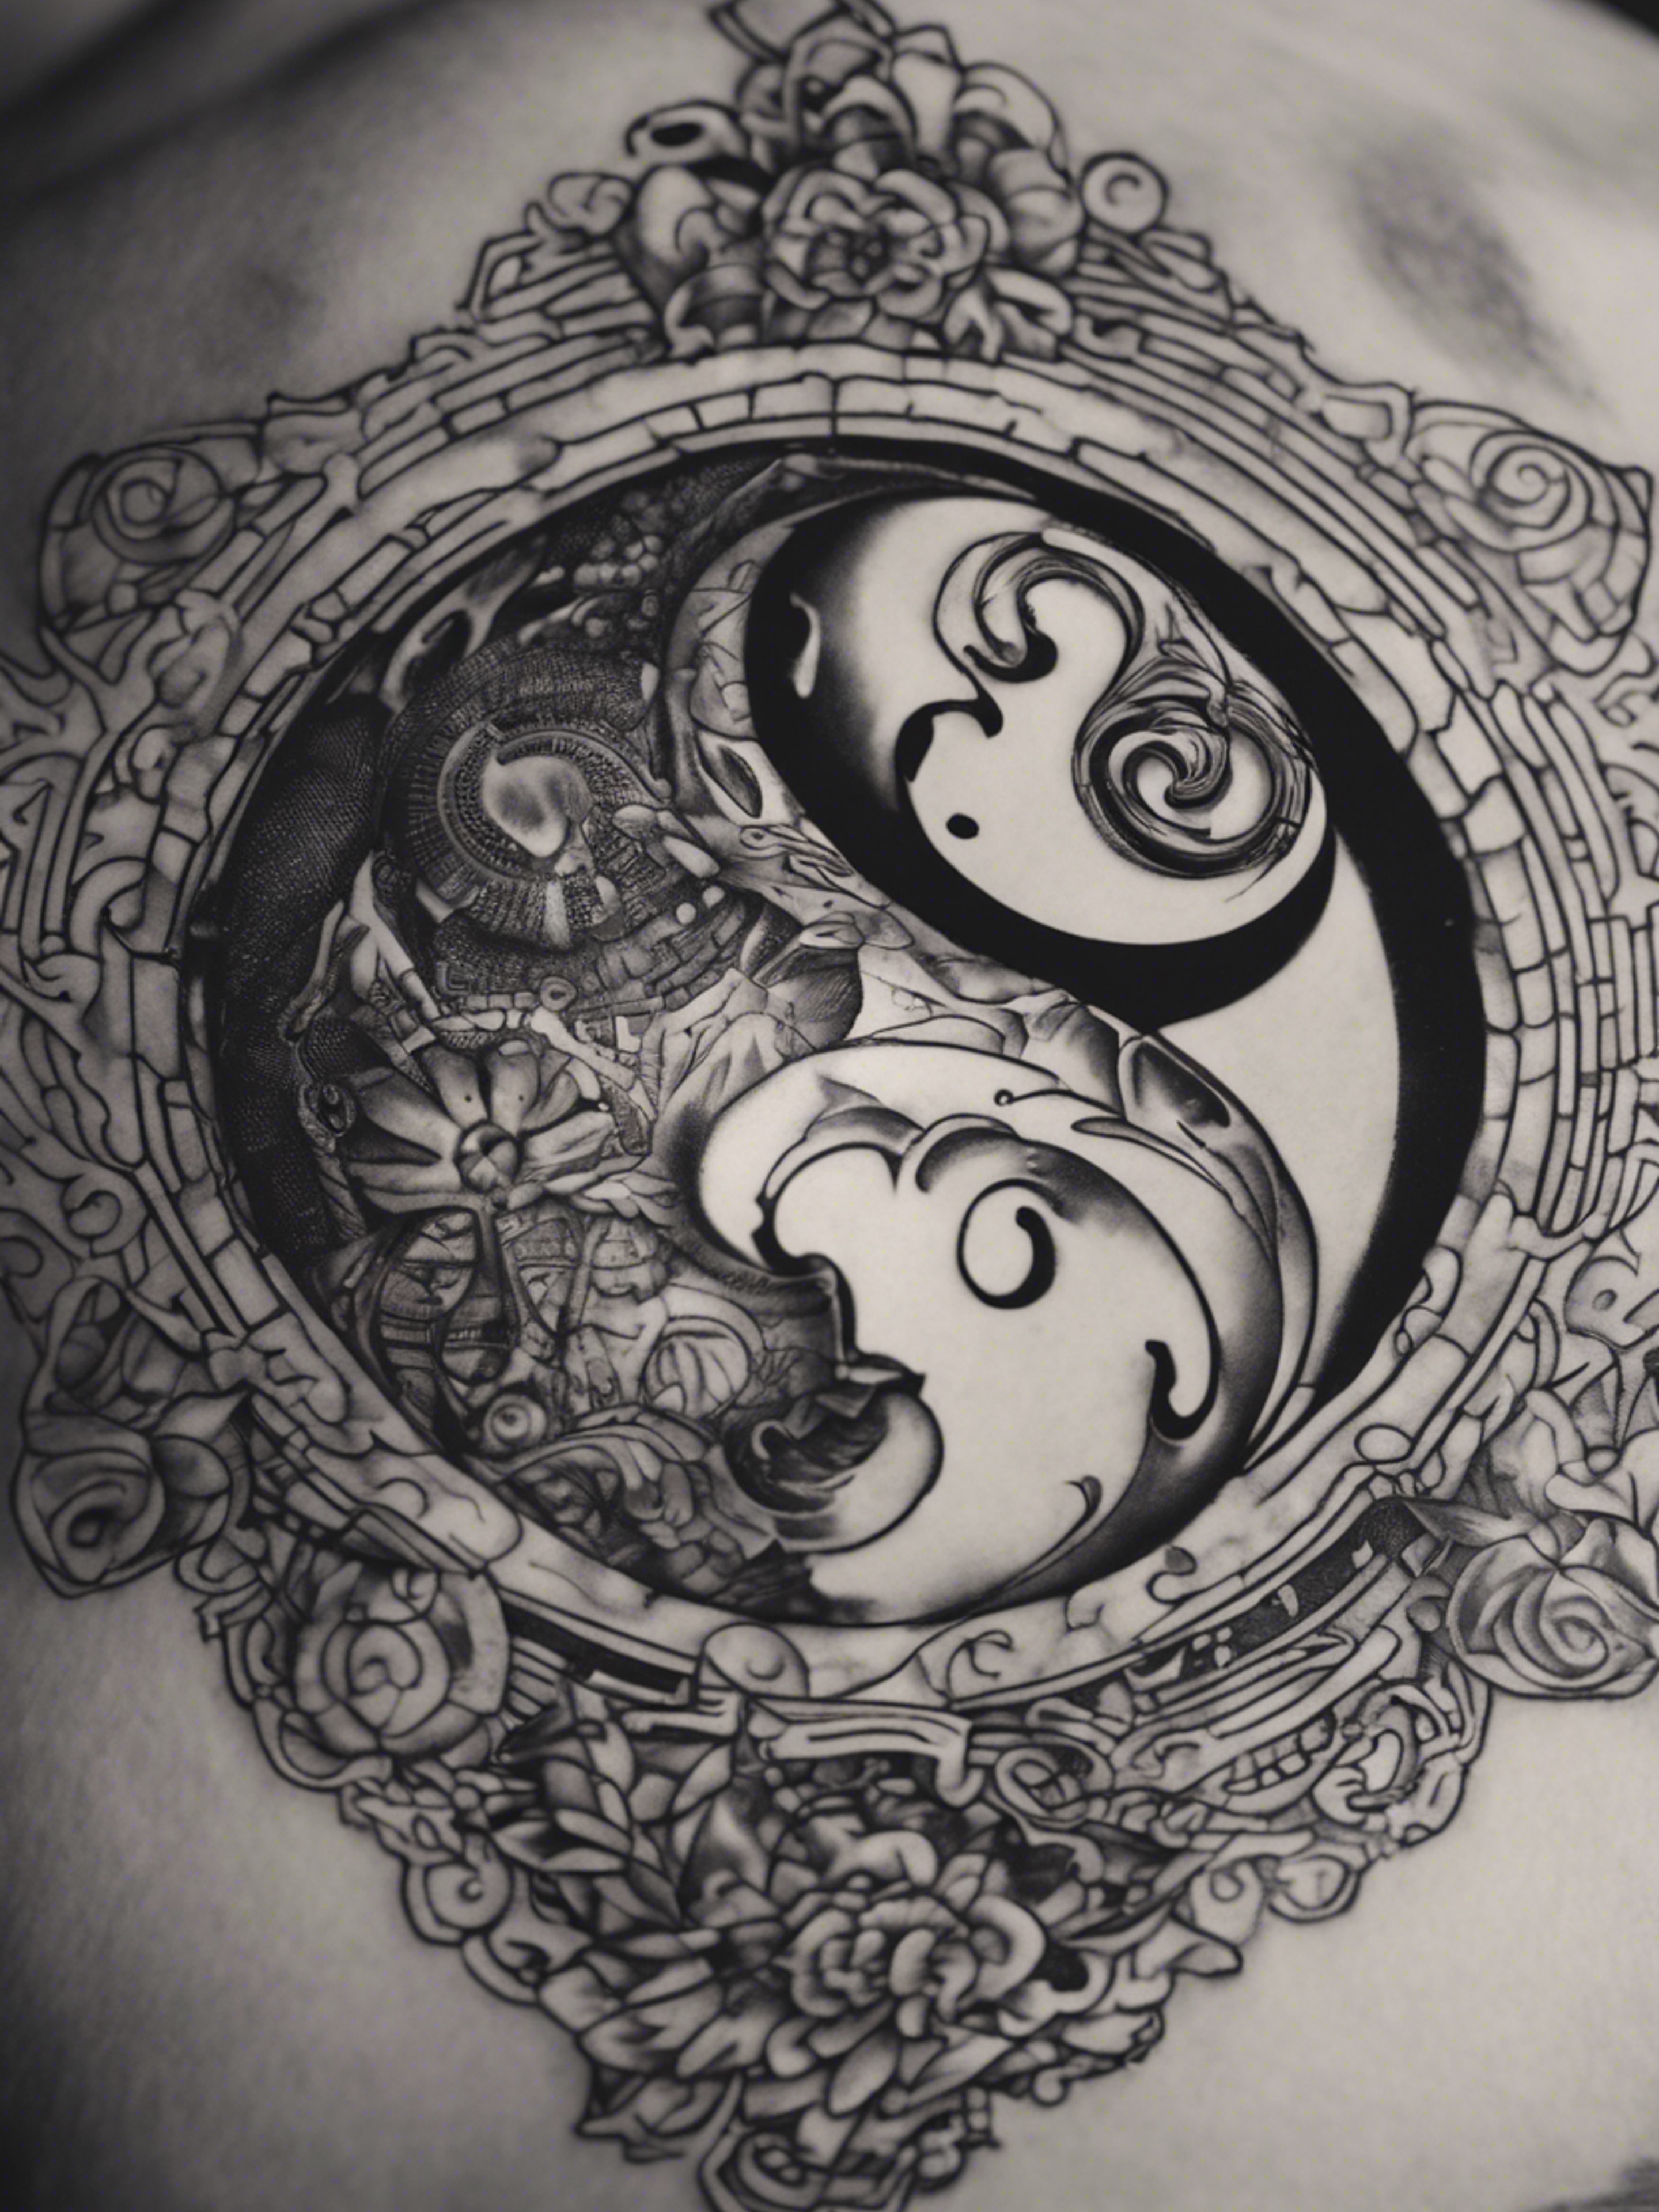 A black and gray tattoo demonstrating the sharp contrast of yin and yang. Tapetai[cf6688009cd14e619f30]